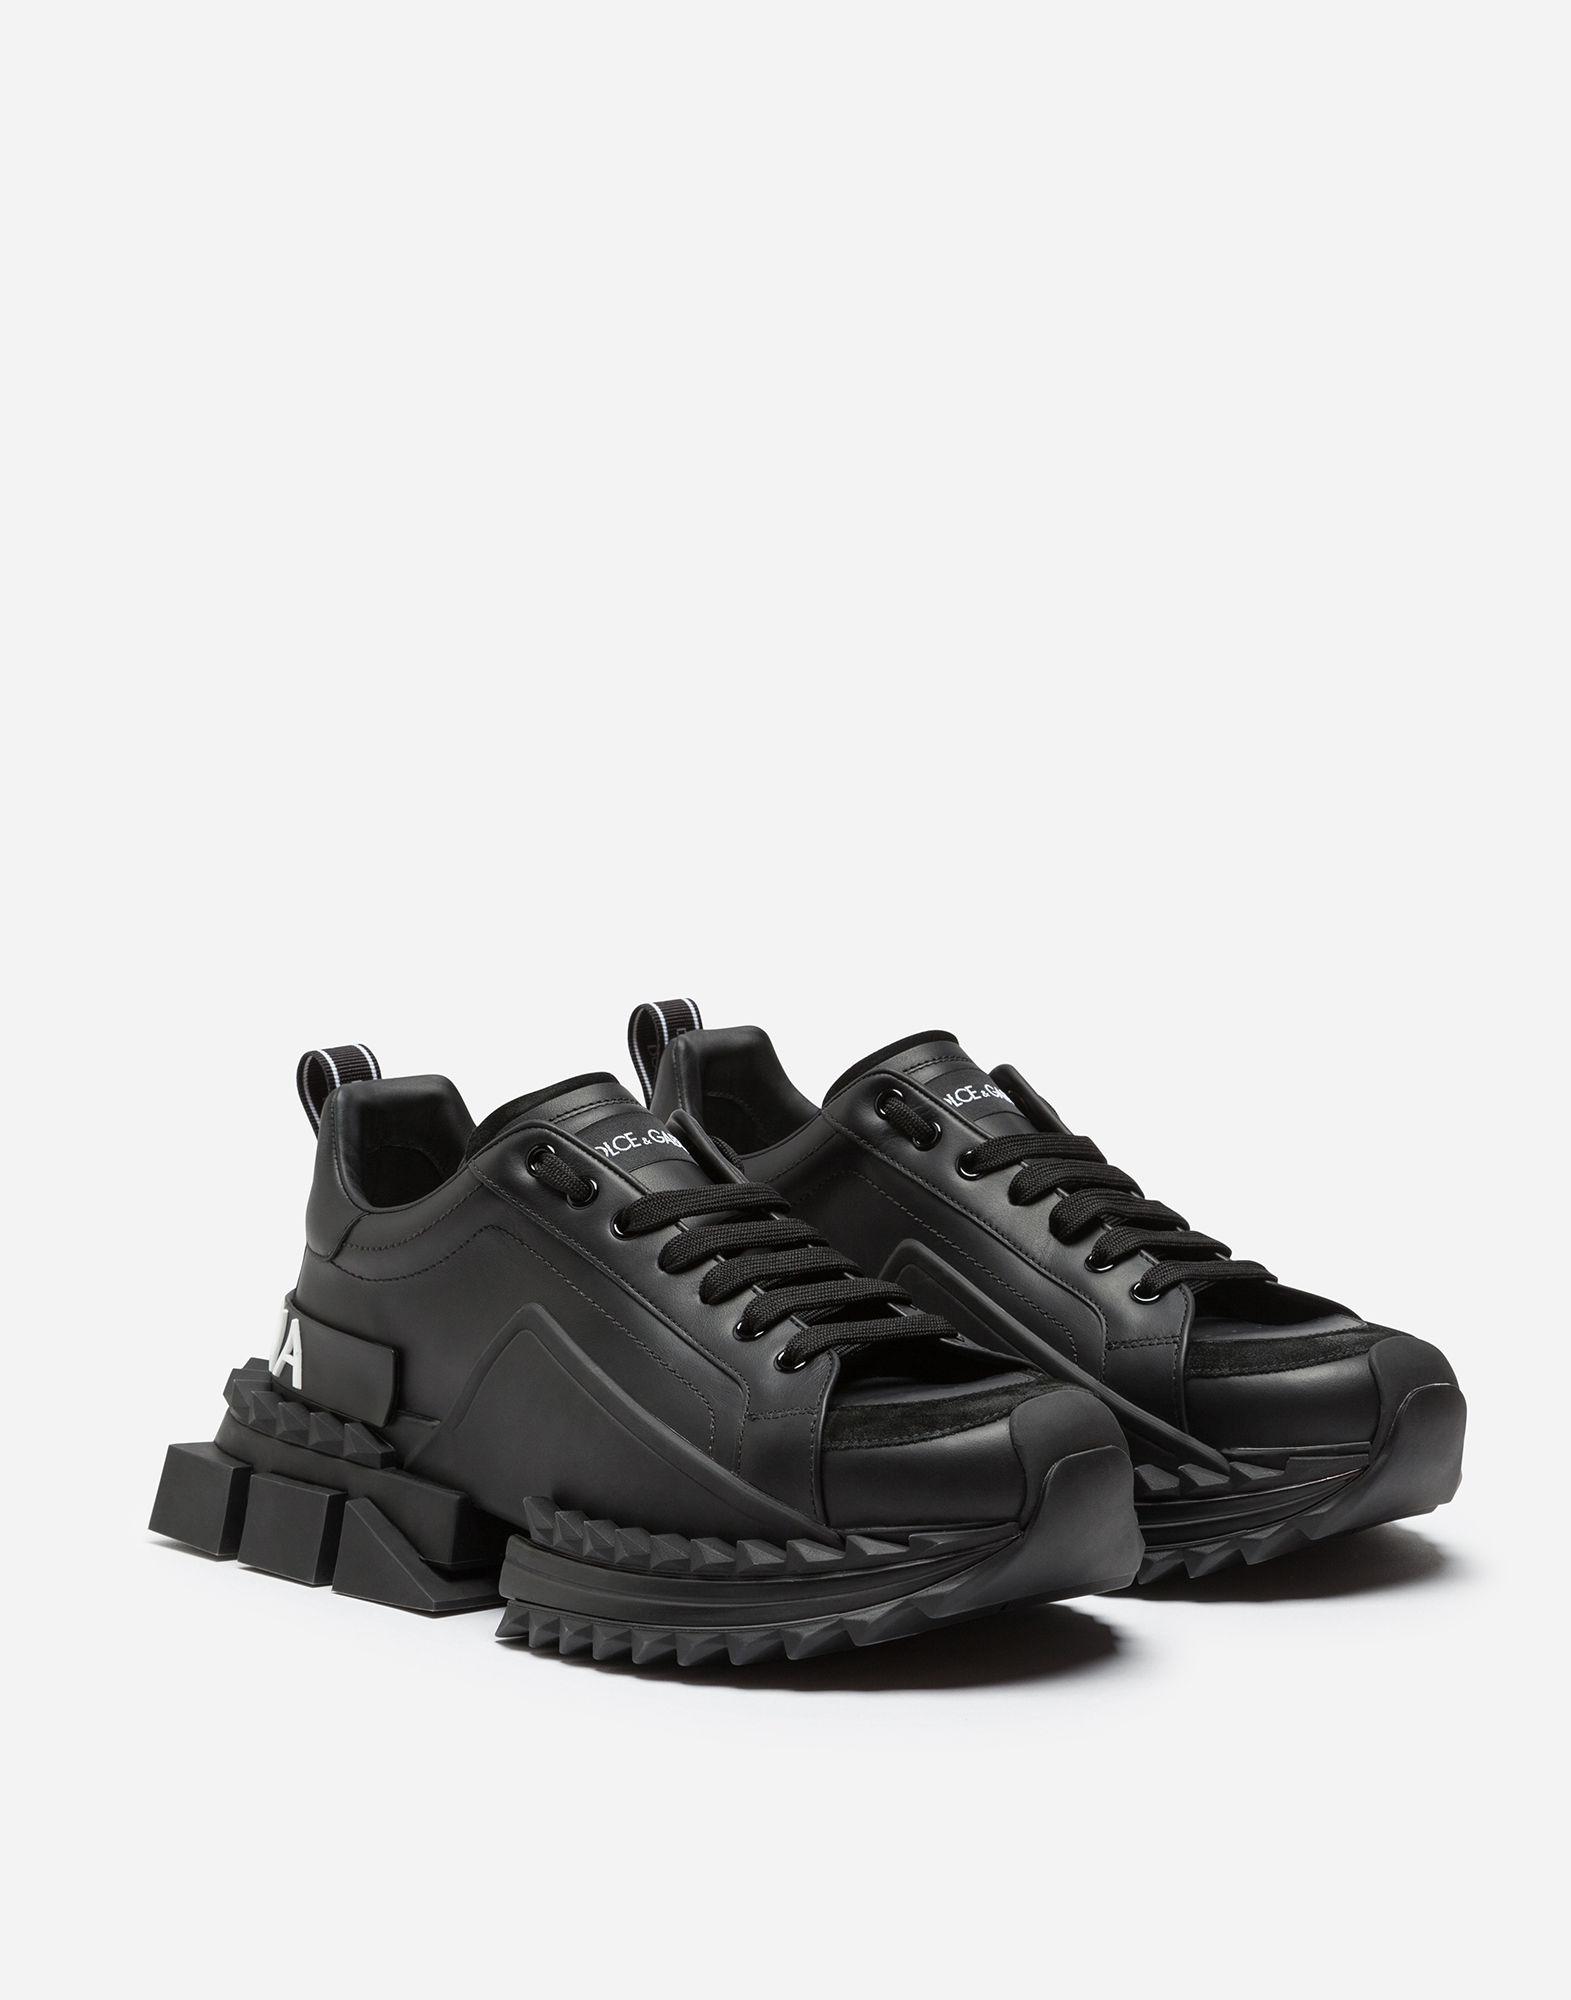 Dolce & Gabbana Leather Super King Sneakers in Black - Lyst